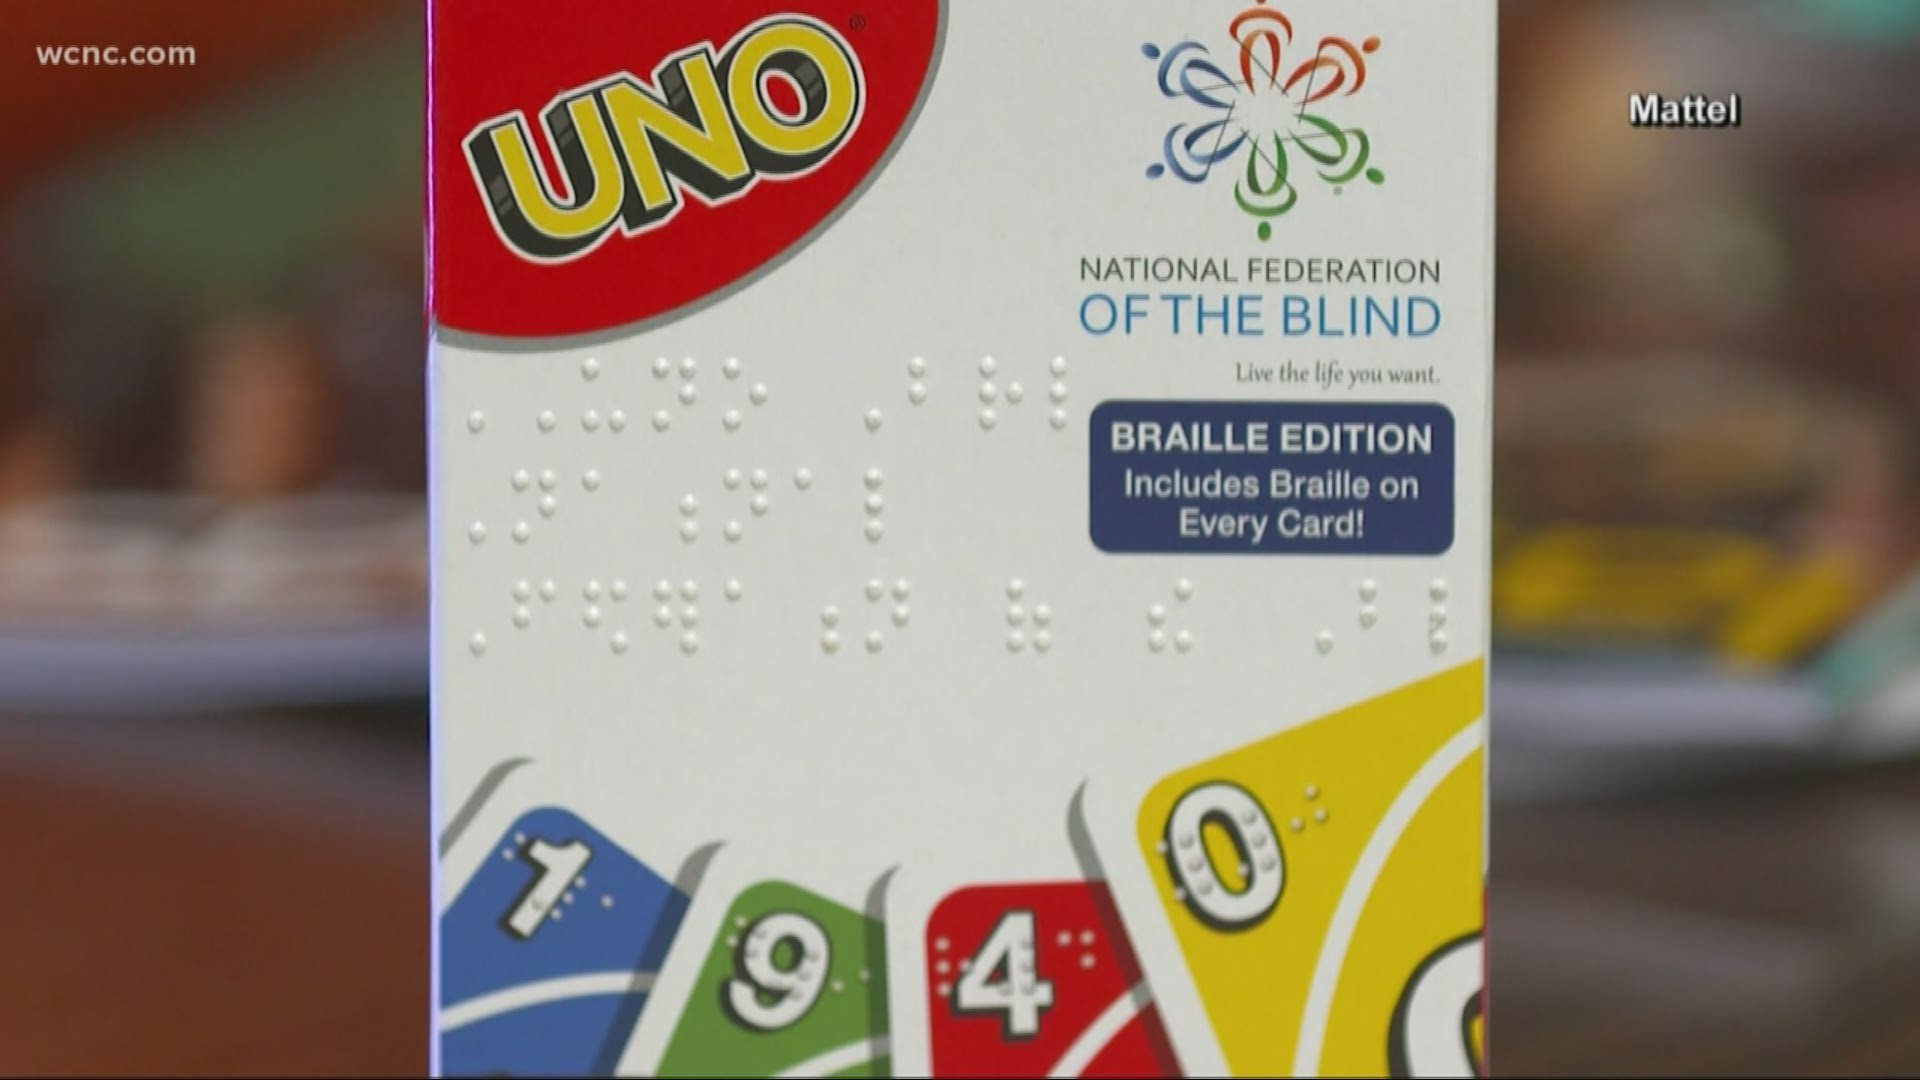 For the first time ever, popular card game UNO is available for blind players. UNO says they're just taking the time to support an underserved community.